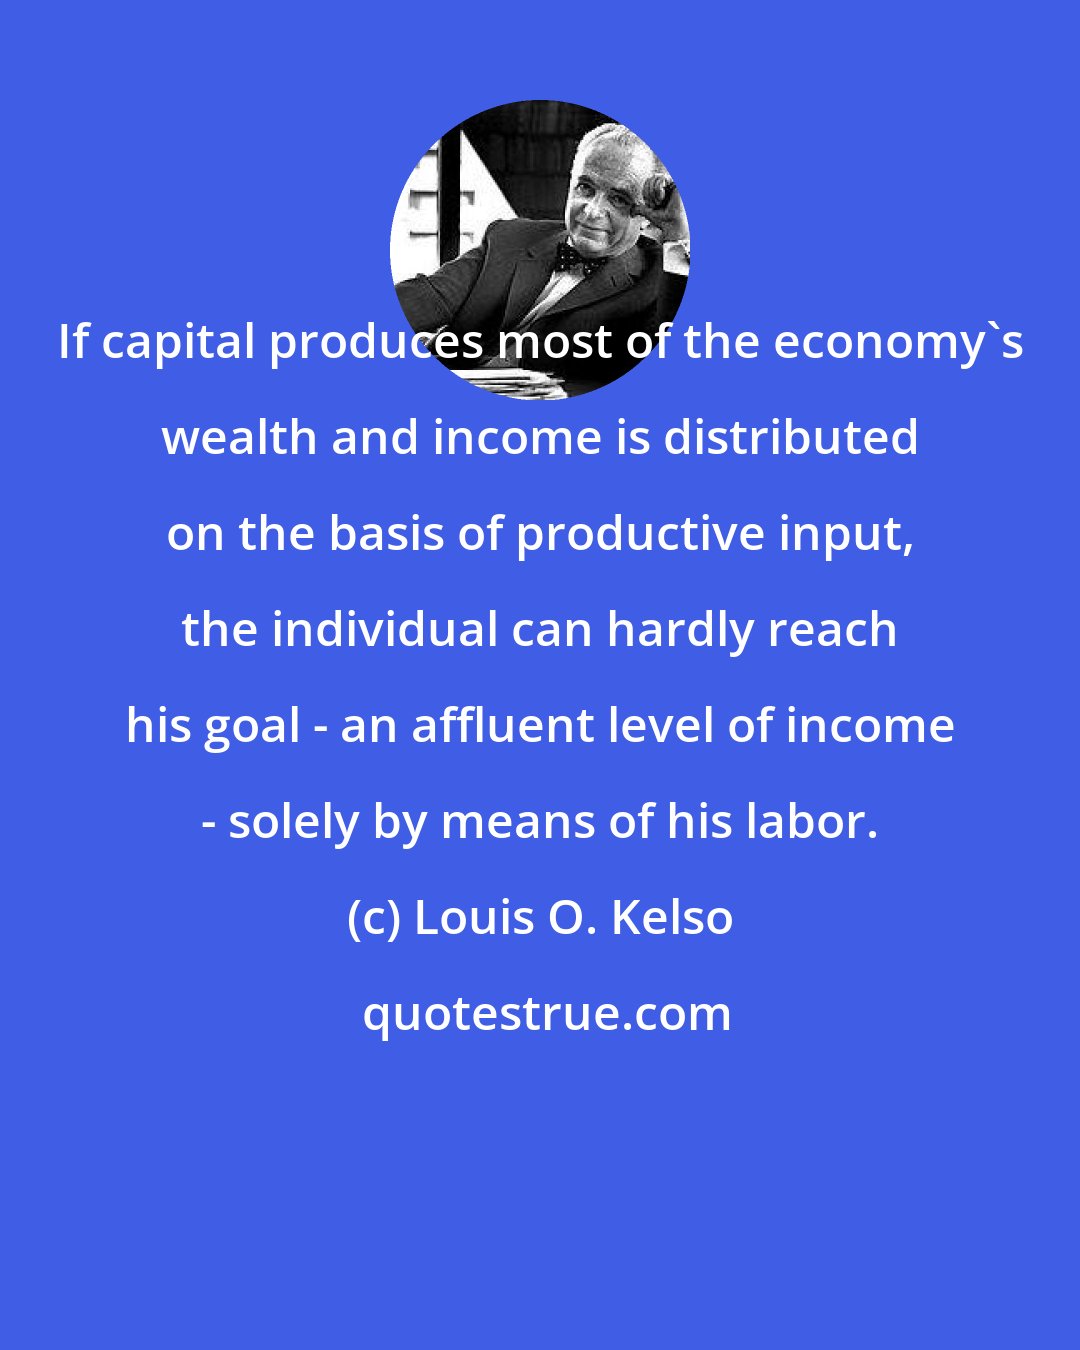 Louis O. Kelso: If capital produces most of the economy's wealth and income is distributed on the basis of productive input, the individual can hardly reach his goal - an affluent level of income - solely by means of his labor.